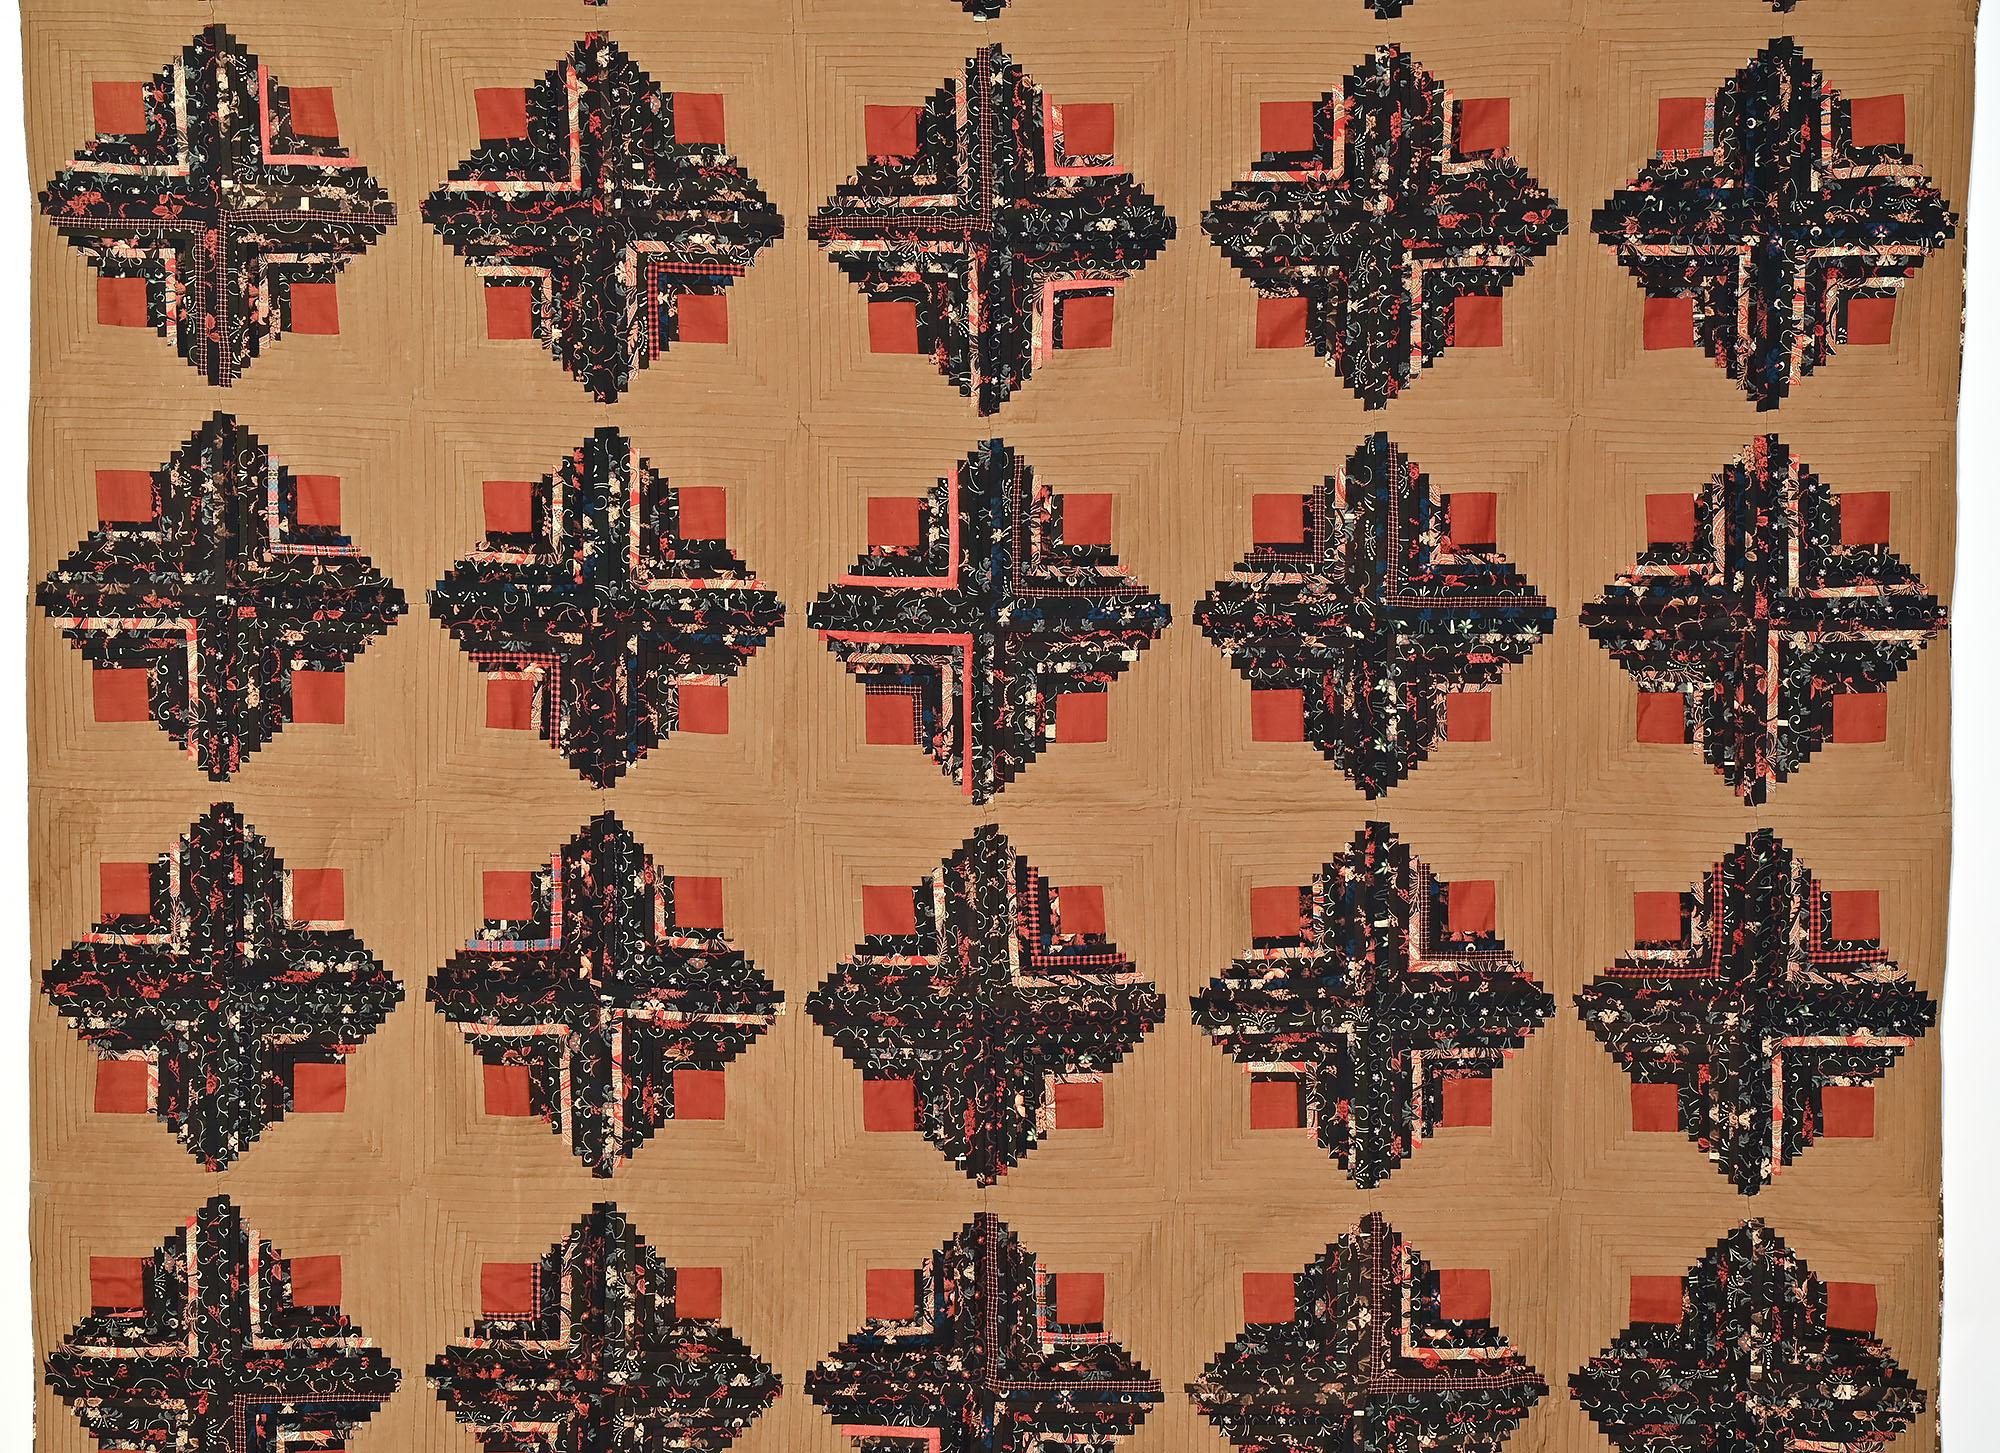 Light and Dark Log Cabin quilt done in a combination of solid and printed wool fabrics. The cafe au lait colored background is an unusual tone and works perfectly with the persimmon color solid squares and darker prints. The printed fabrics echo the